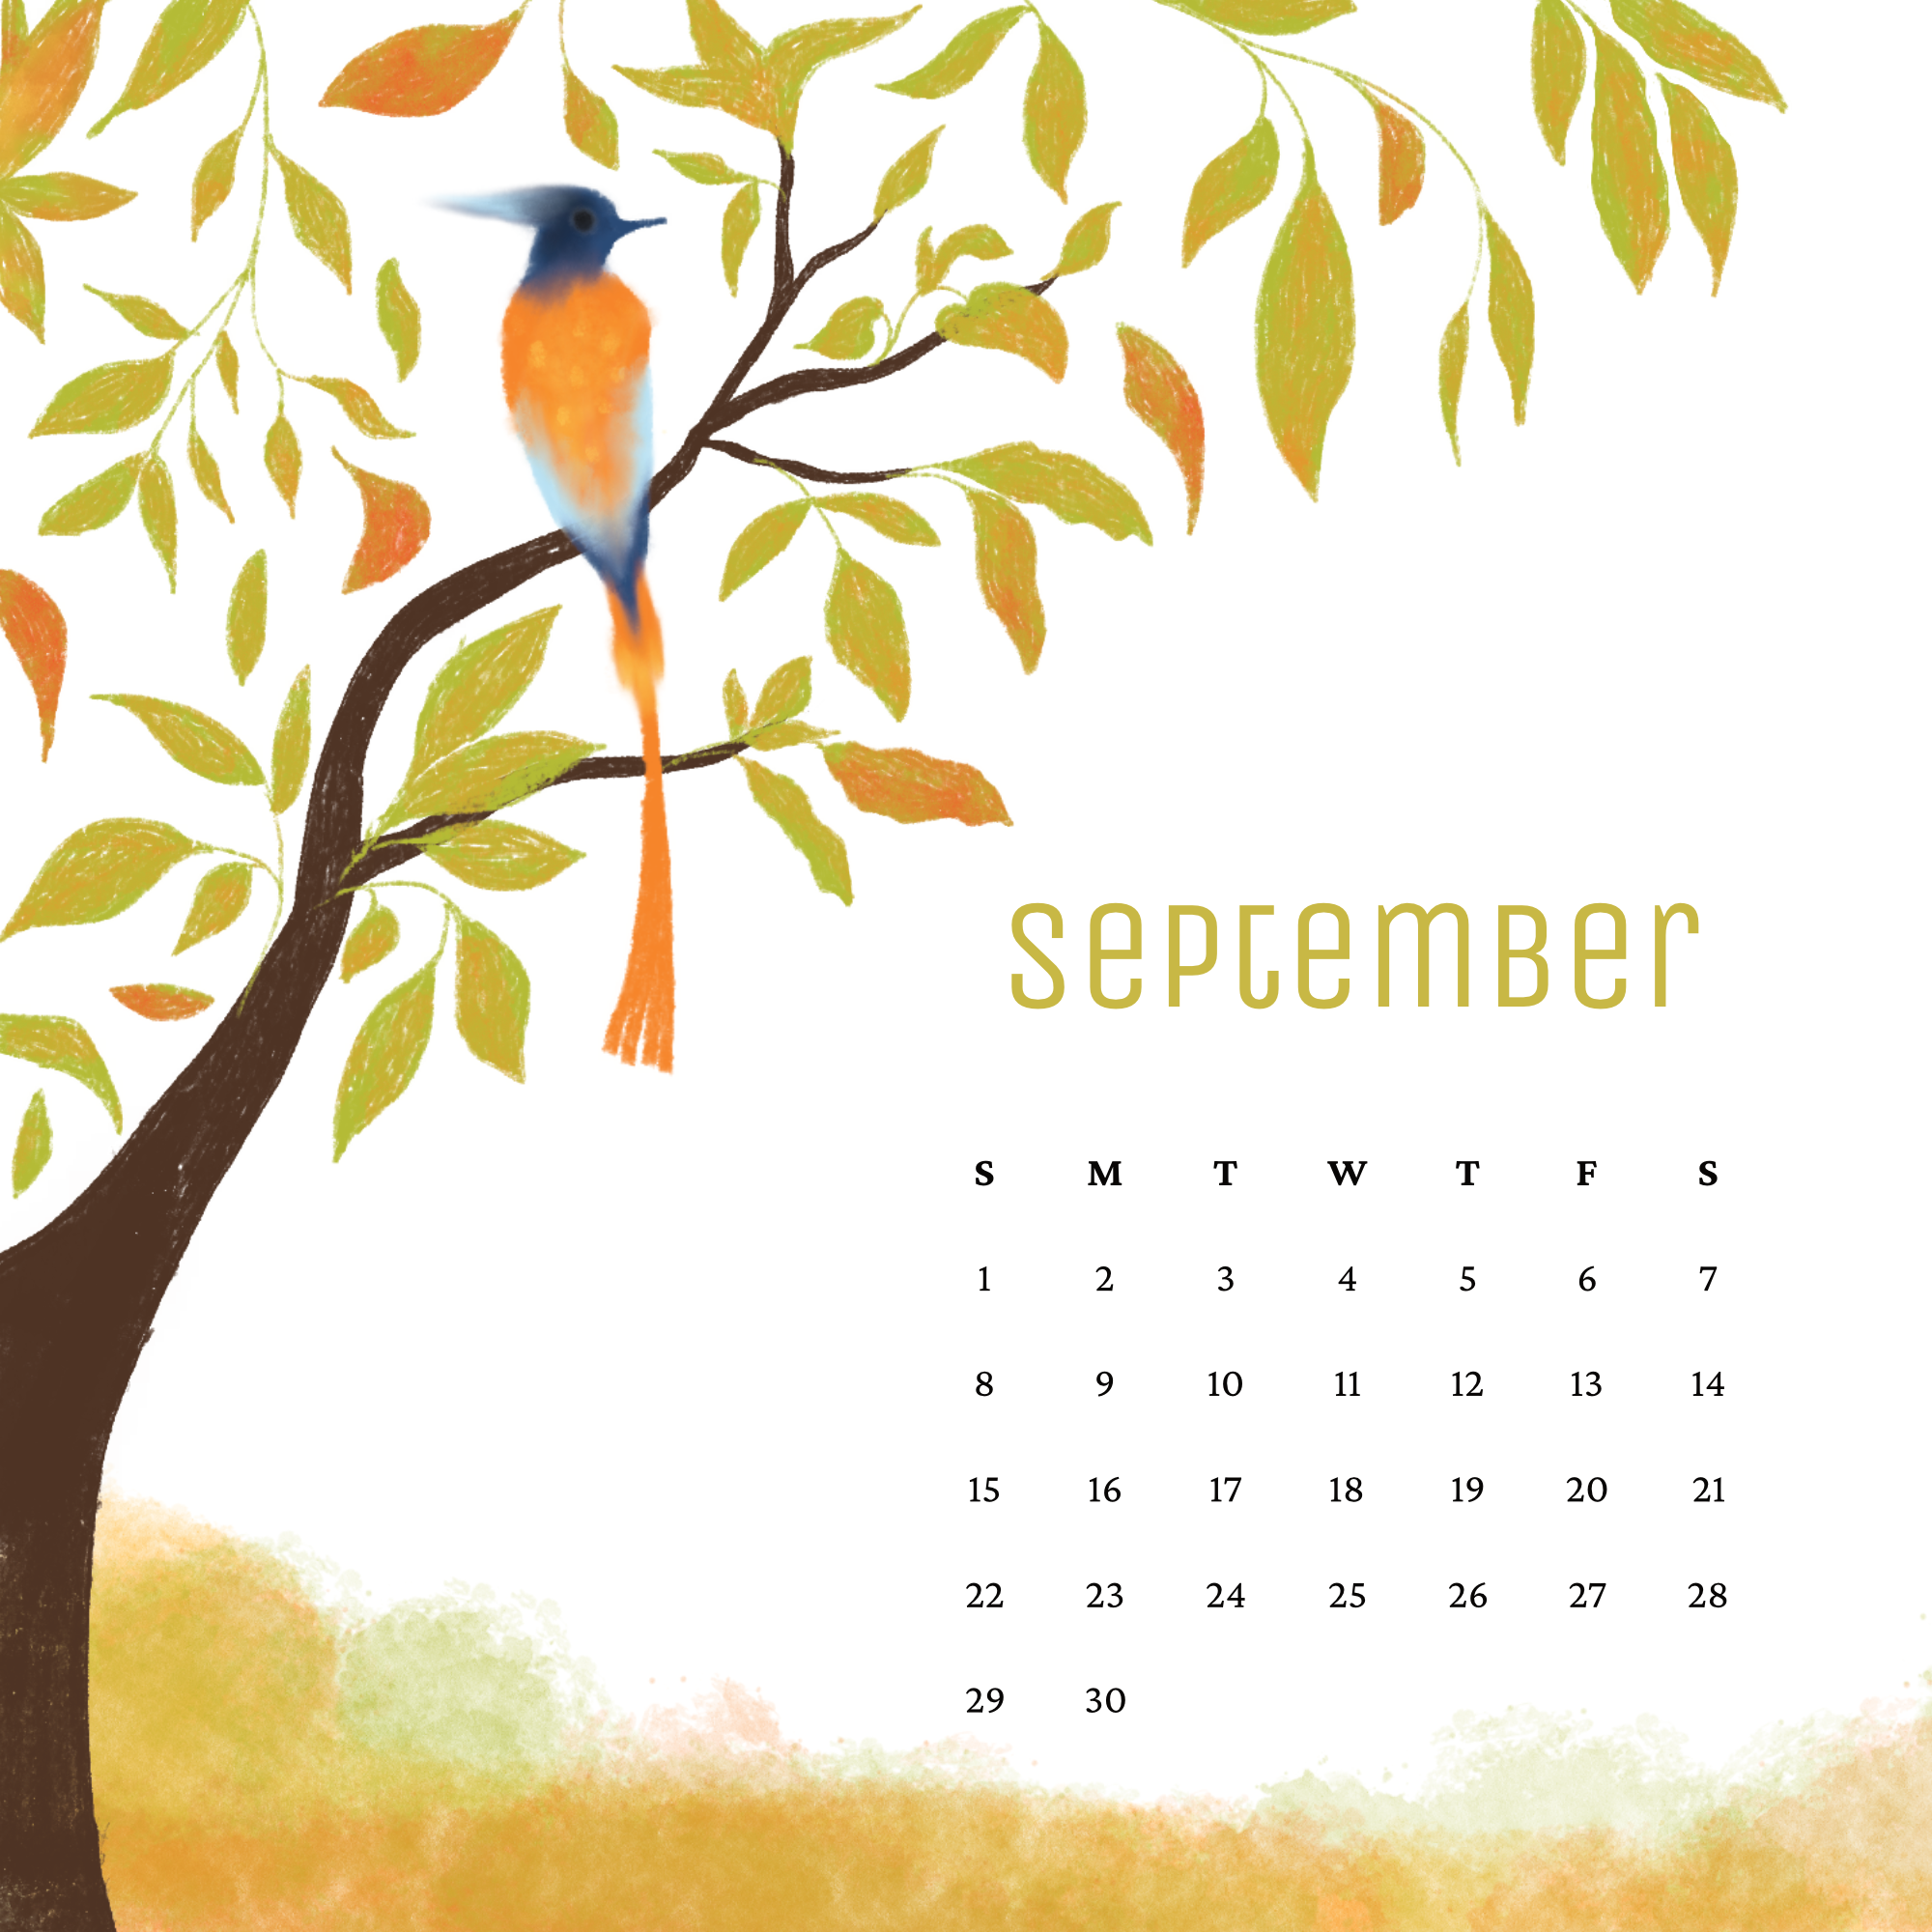 A bird perched on a tree. This is an autumn theme illustration of a calendar for the month of September.